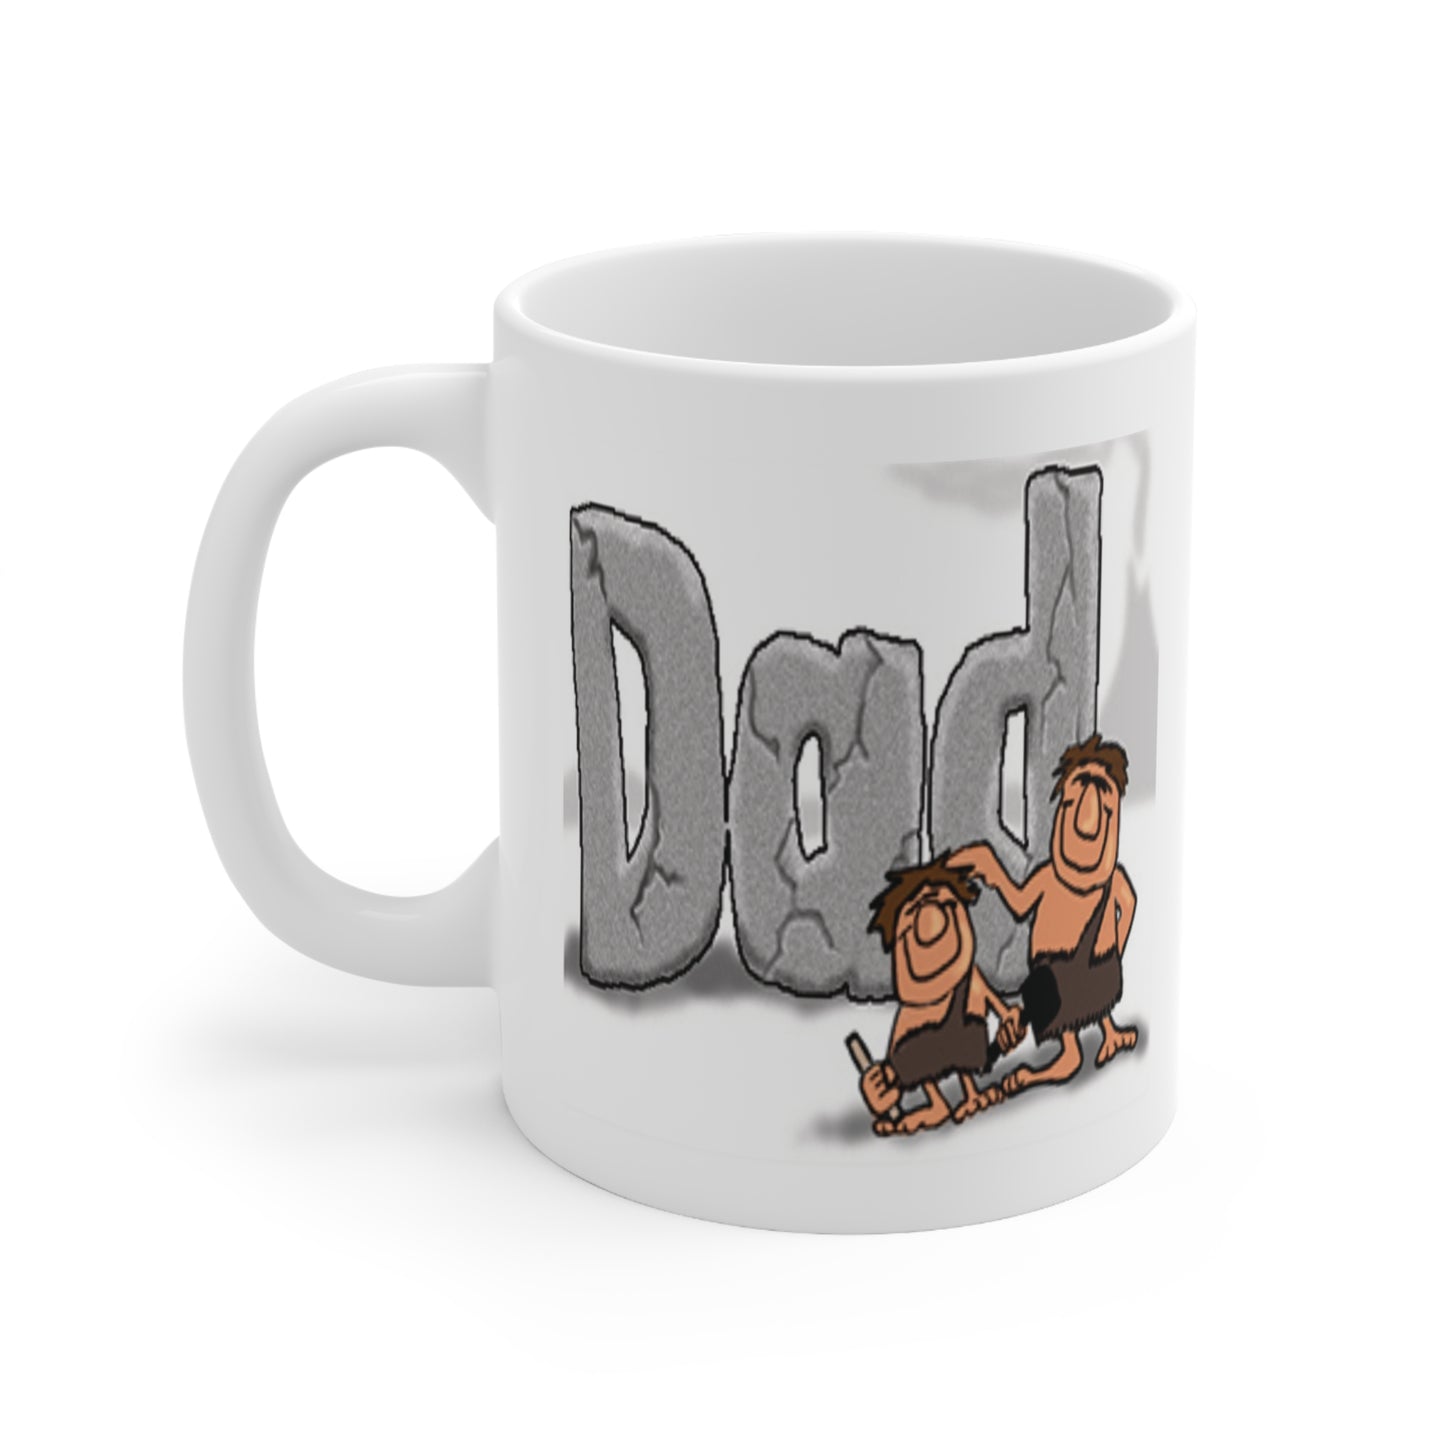 A white ceramic coffee mug with a funny cartoon design of a caveman patting his son on the head after he carved Dad in stone.